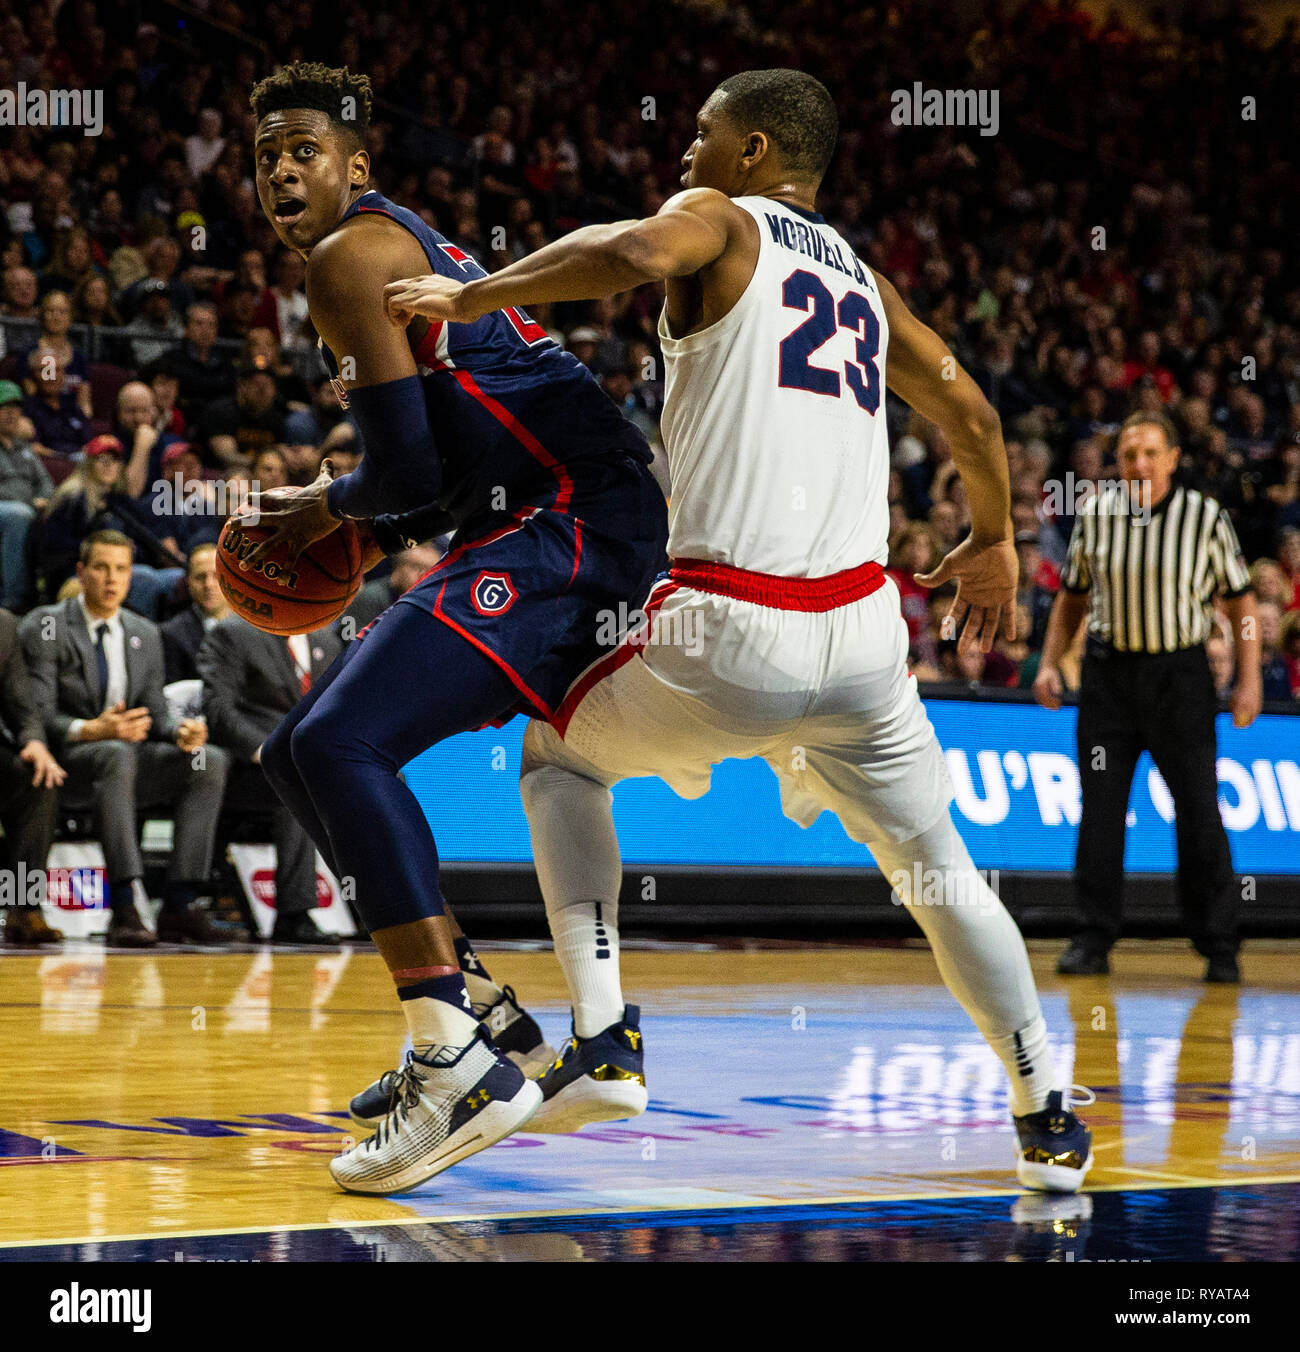 Mar 12 2019 Las Vegas, NV, U.S.A. St. Mary's forward Malik Fitts (24) drives to the basket during the NCAA West Coast Conference Men's Basketball Tournament championship between the Gonzaga Bulldogs and the Saint Mary's Gaels 60-47 win at Orleans Arena Las Vegas, NV. Thurman James/CSM Stock Photo